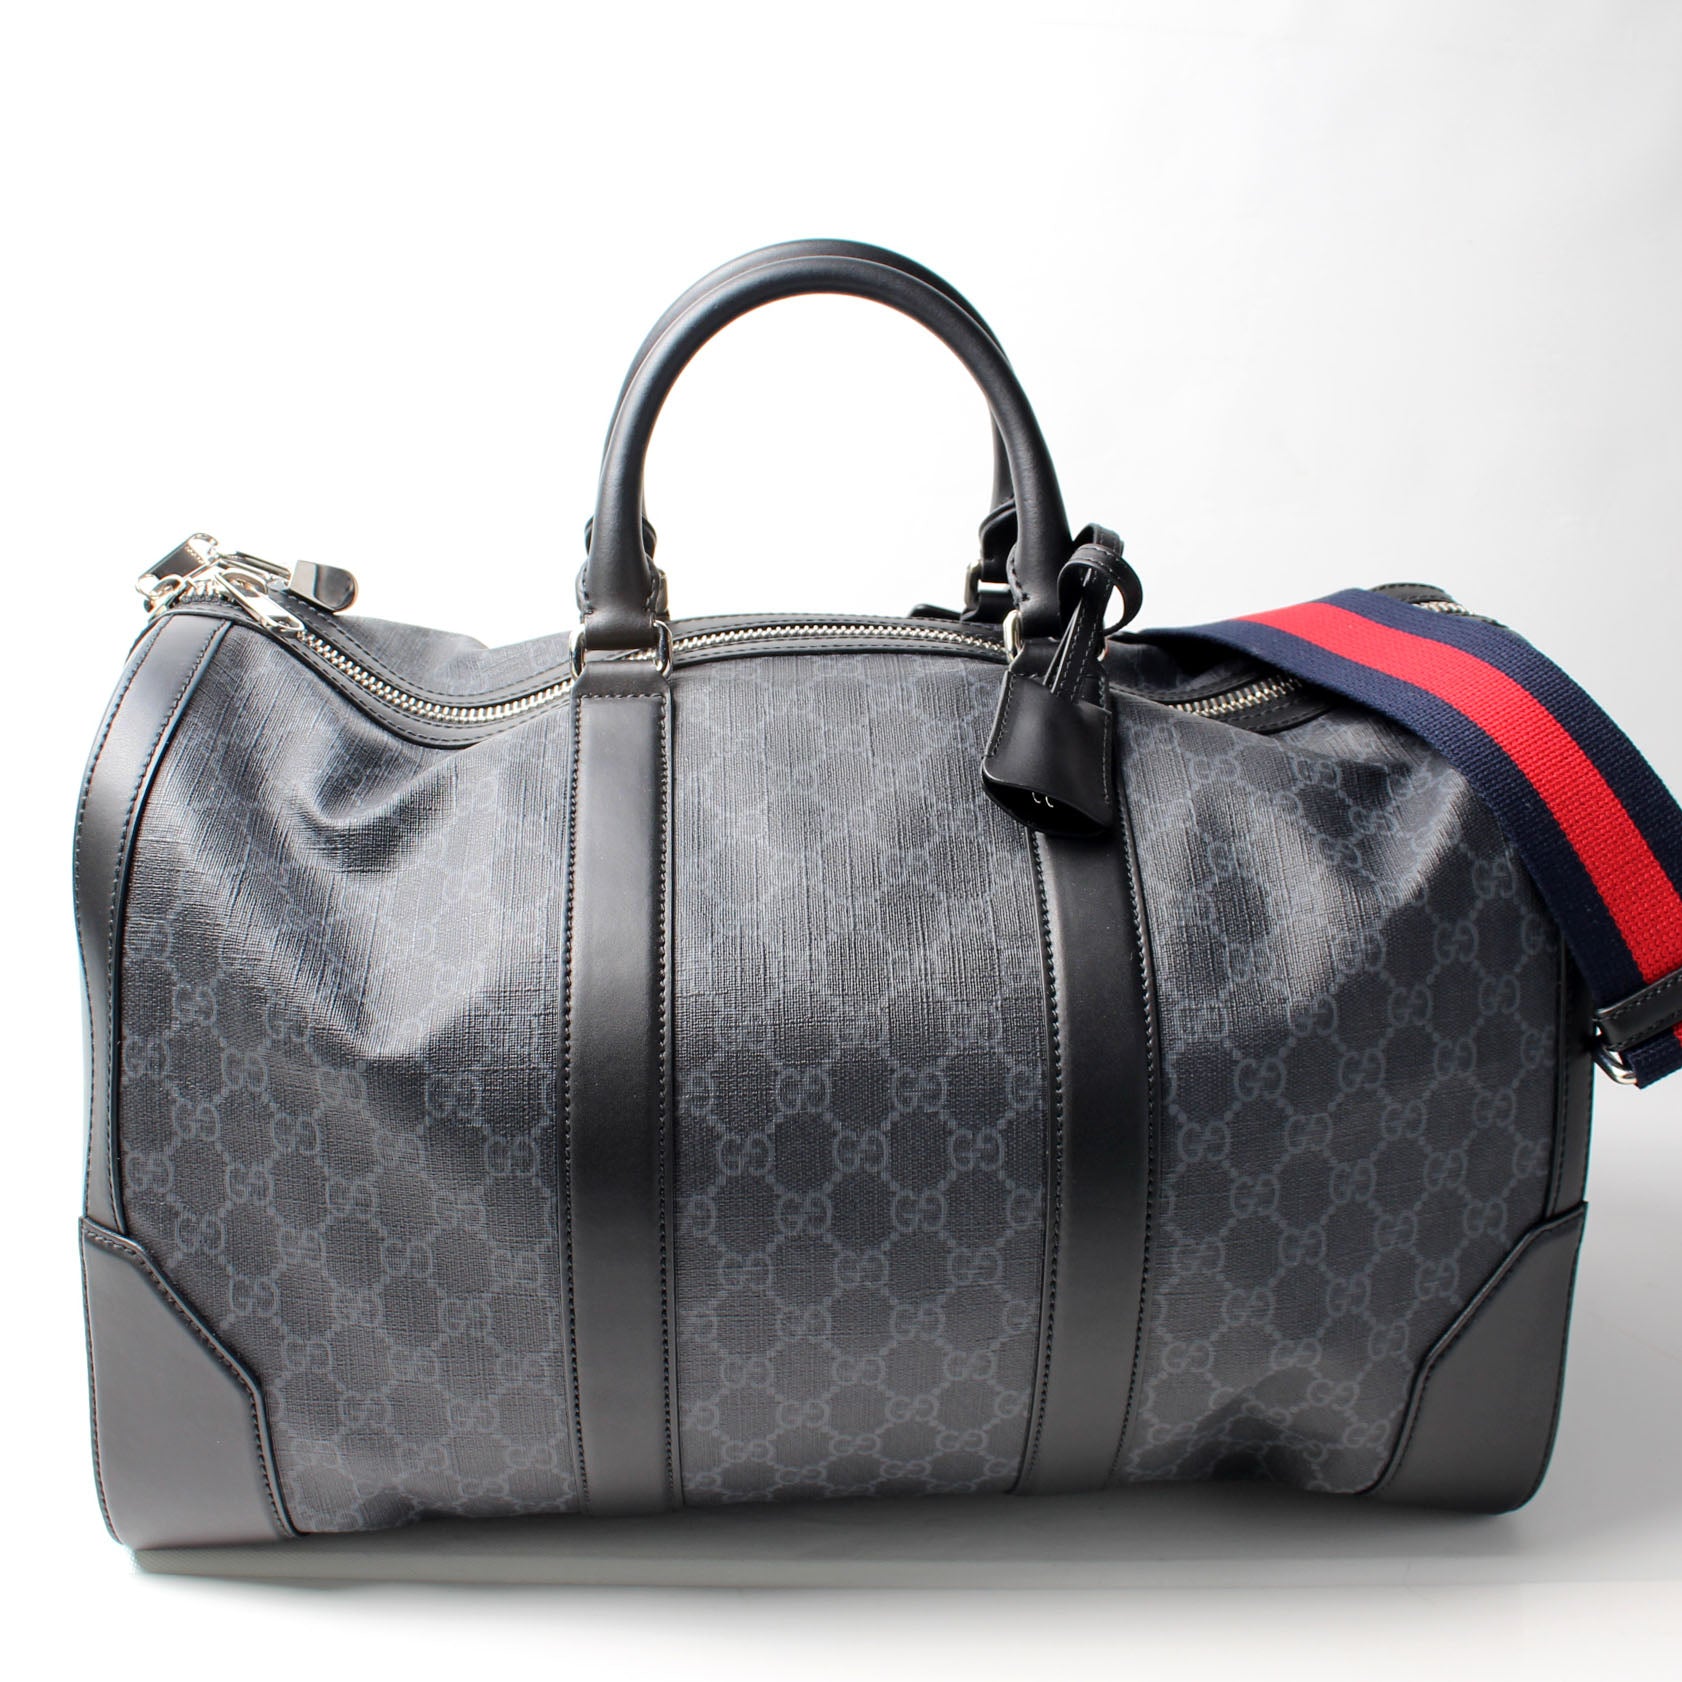 GUCCI Carry-on GG Supreme Canvas Duffle Bag Black 474131